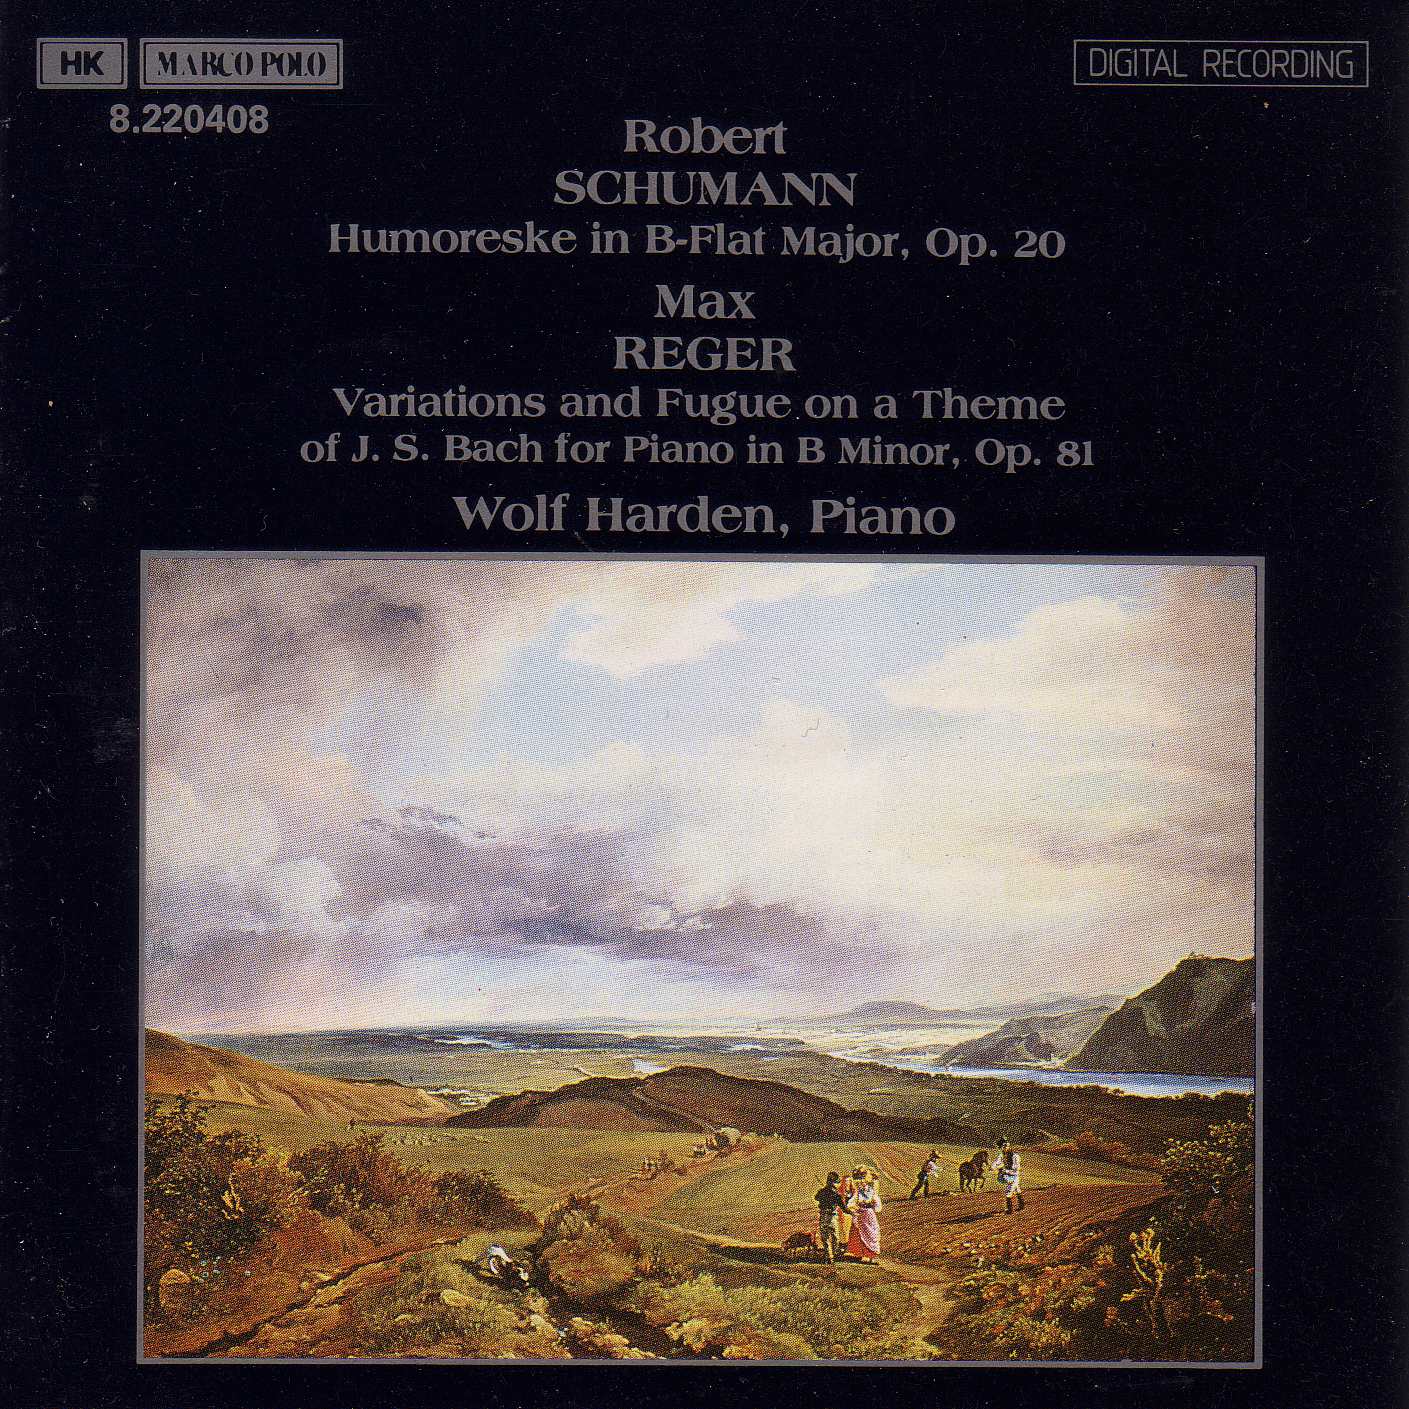 CD Schumann - Humoresque In B-Flat Major, Reger - Variations And Fugue On A Theme Of J.S. Bach